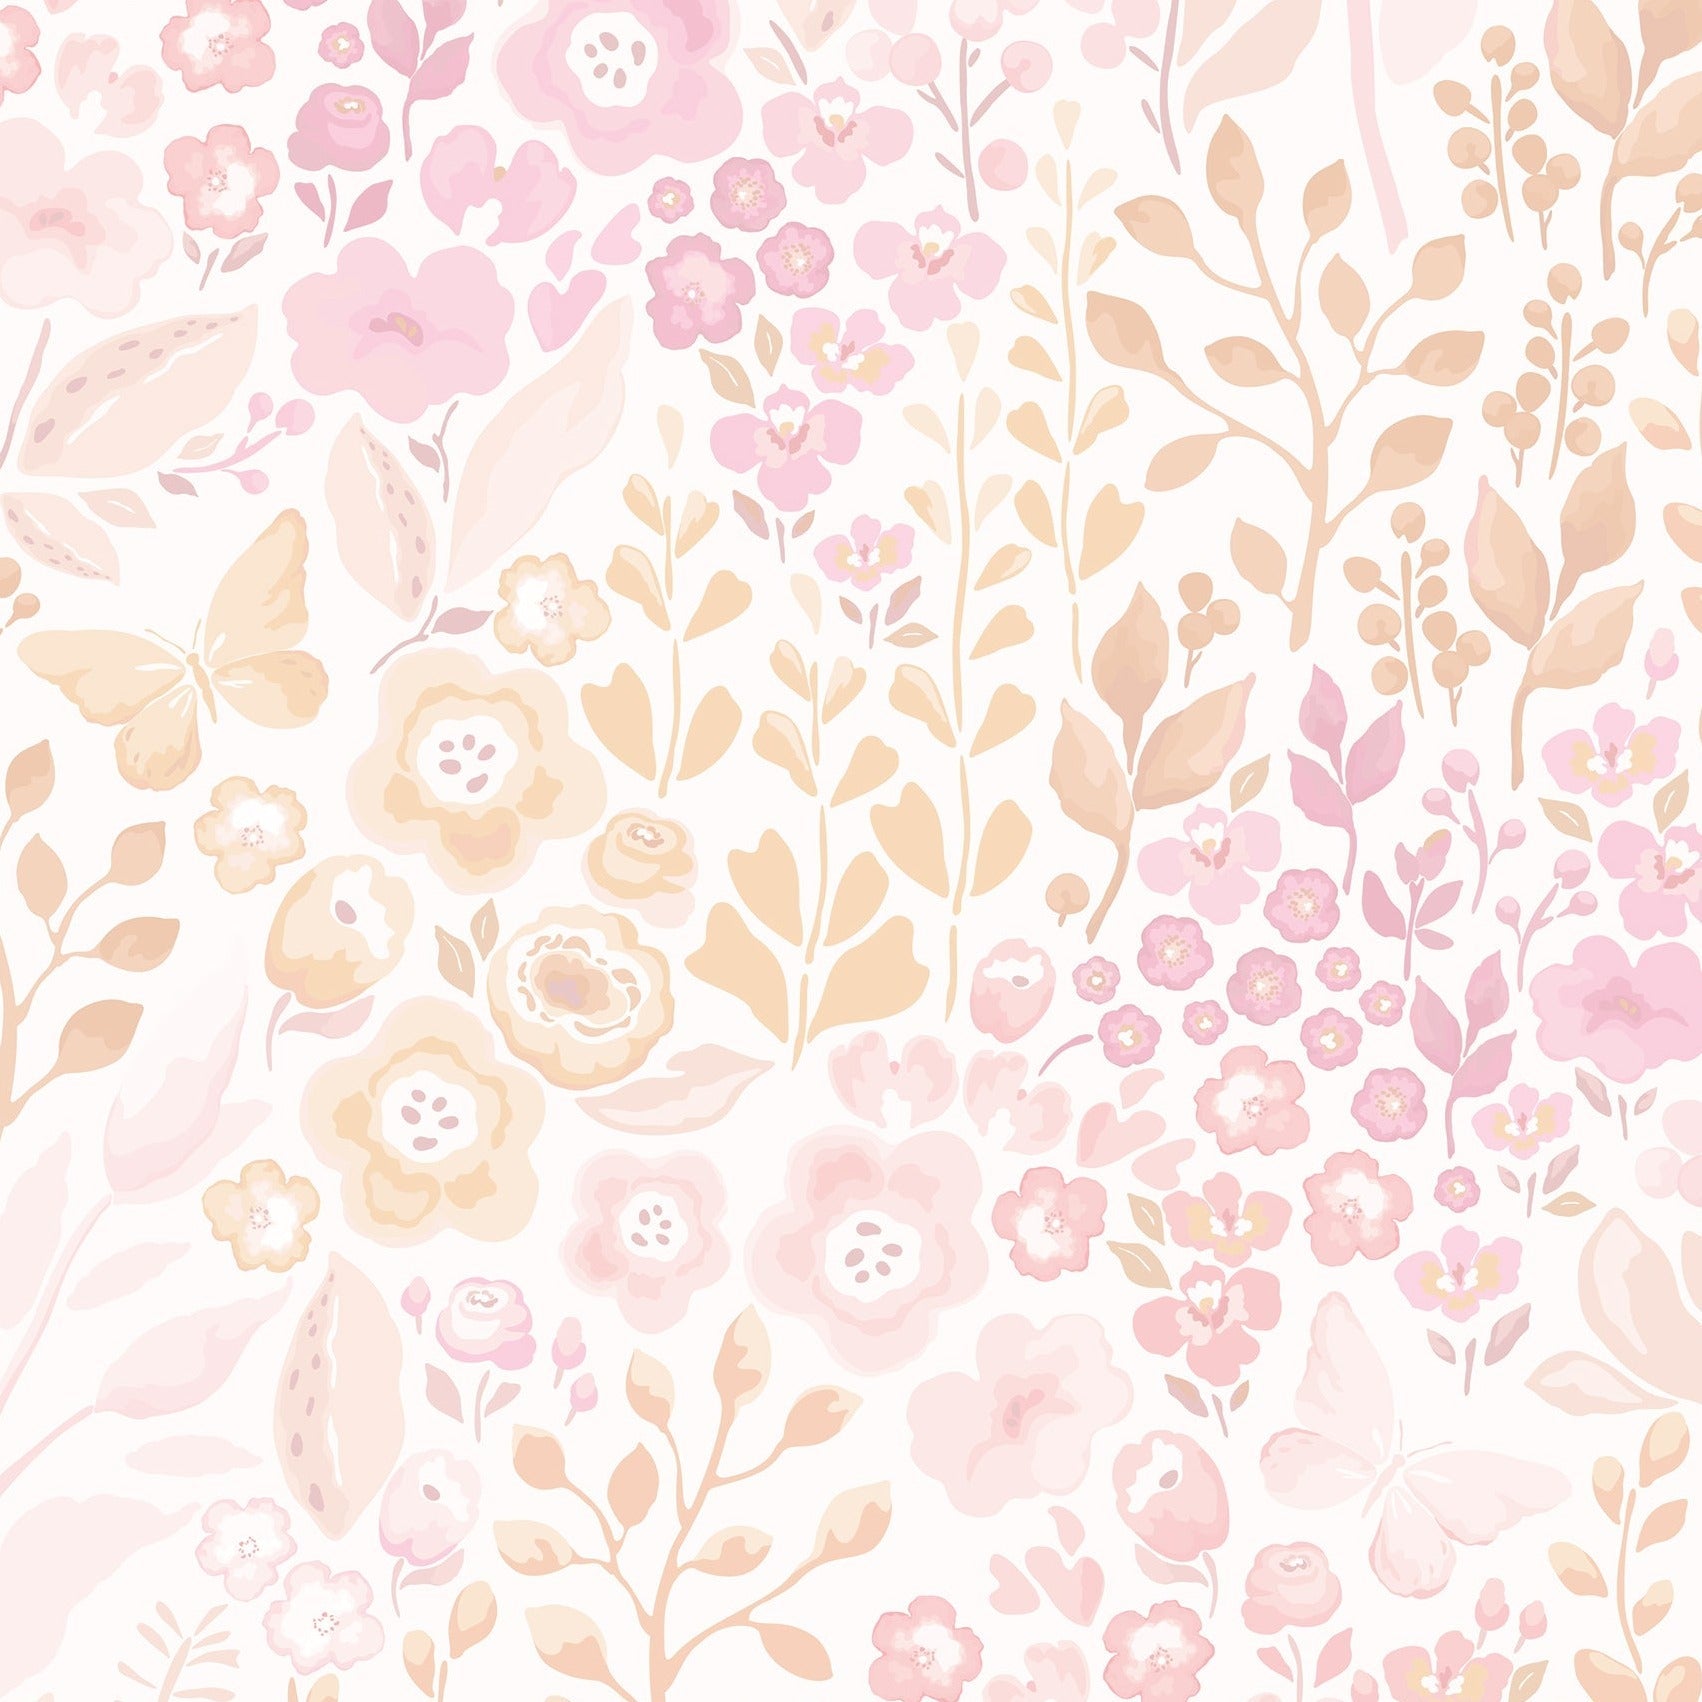 A close-up view of the Pretty Petals Wallpaper - 25" reveals a detailed and dainty pattern of pink flowers and foliage, expressing a hand-painted effect. This wallpaper is a testament to soft elegance, perfect for adding a gentle yet sophisticated touch to any interior.